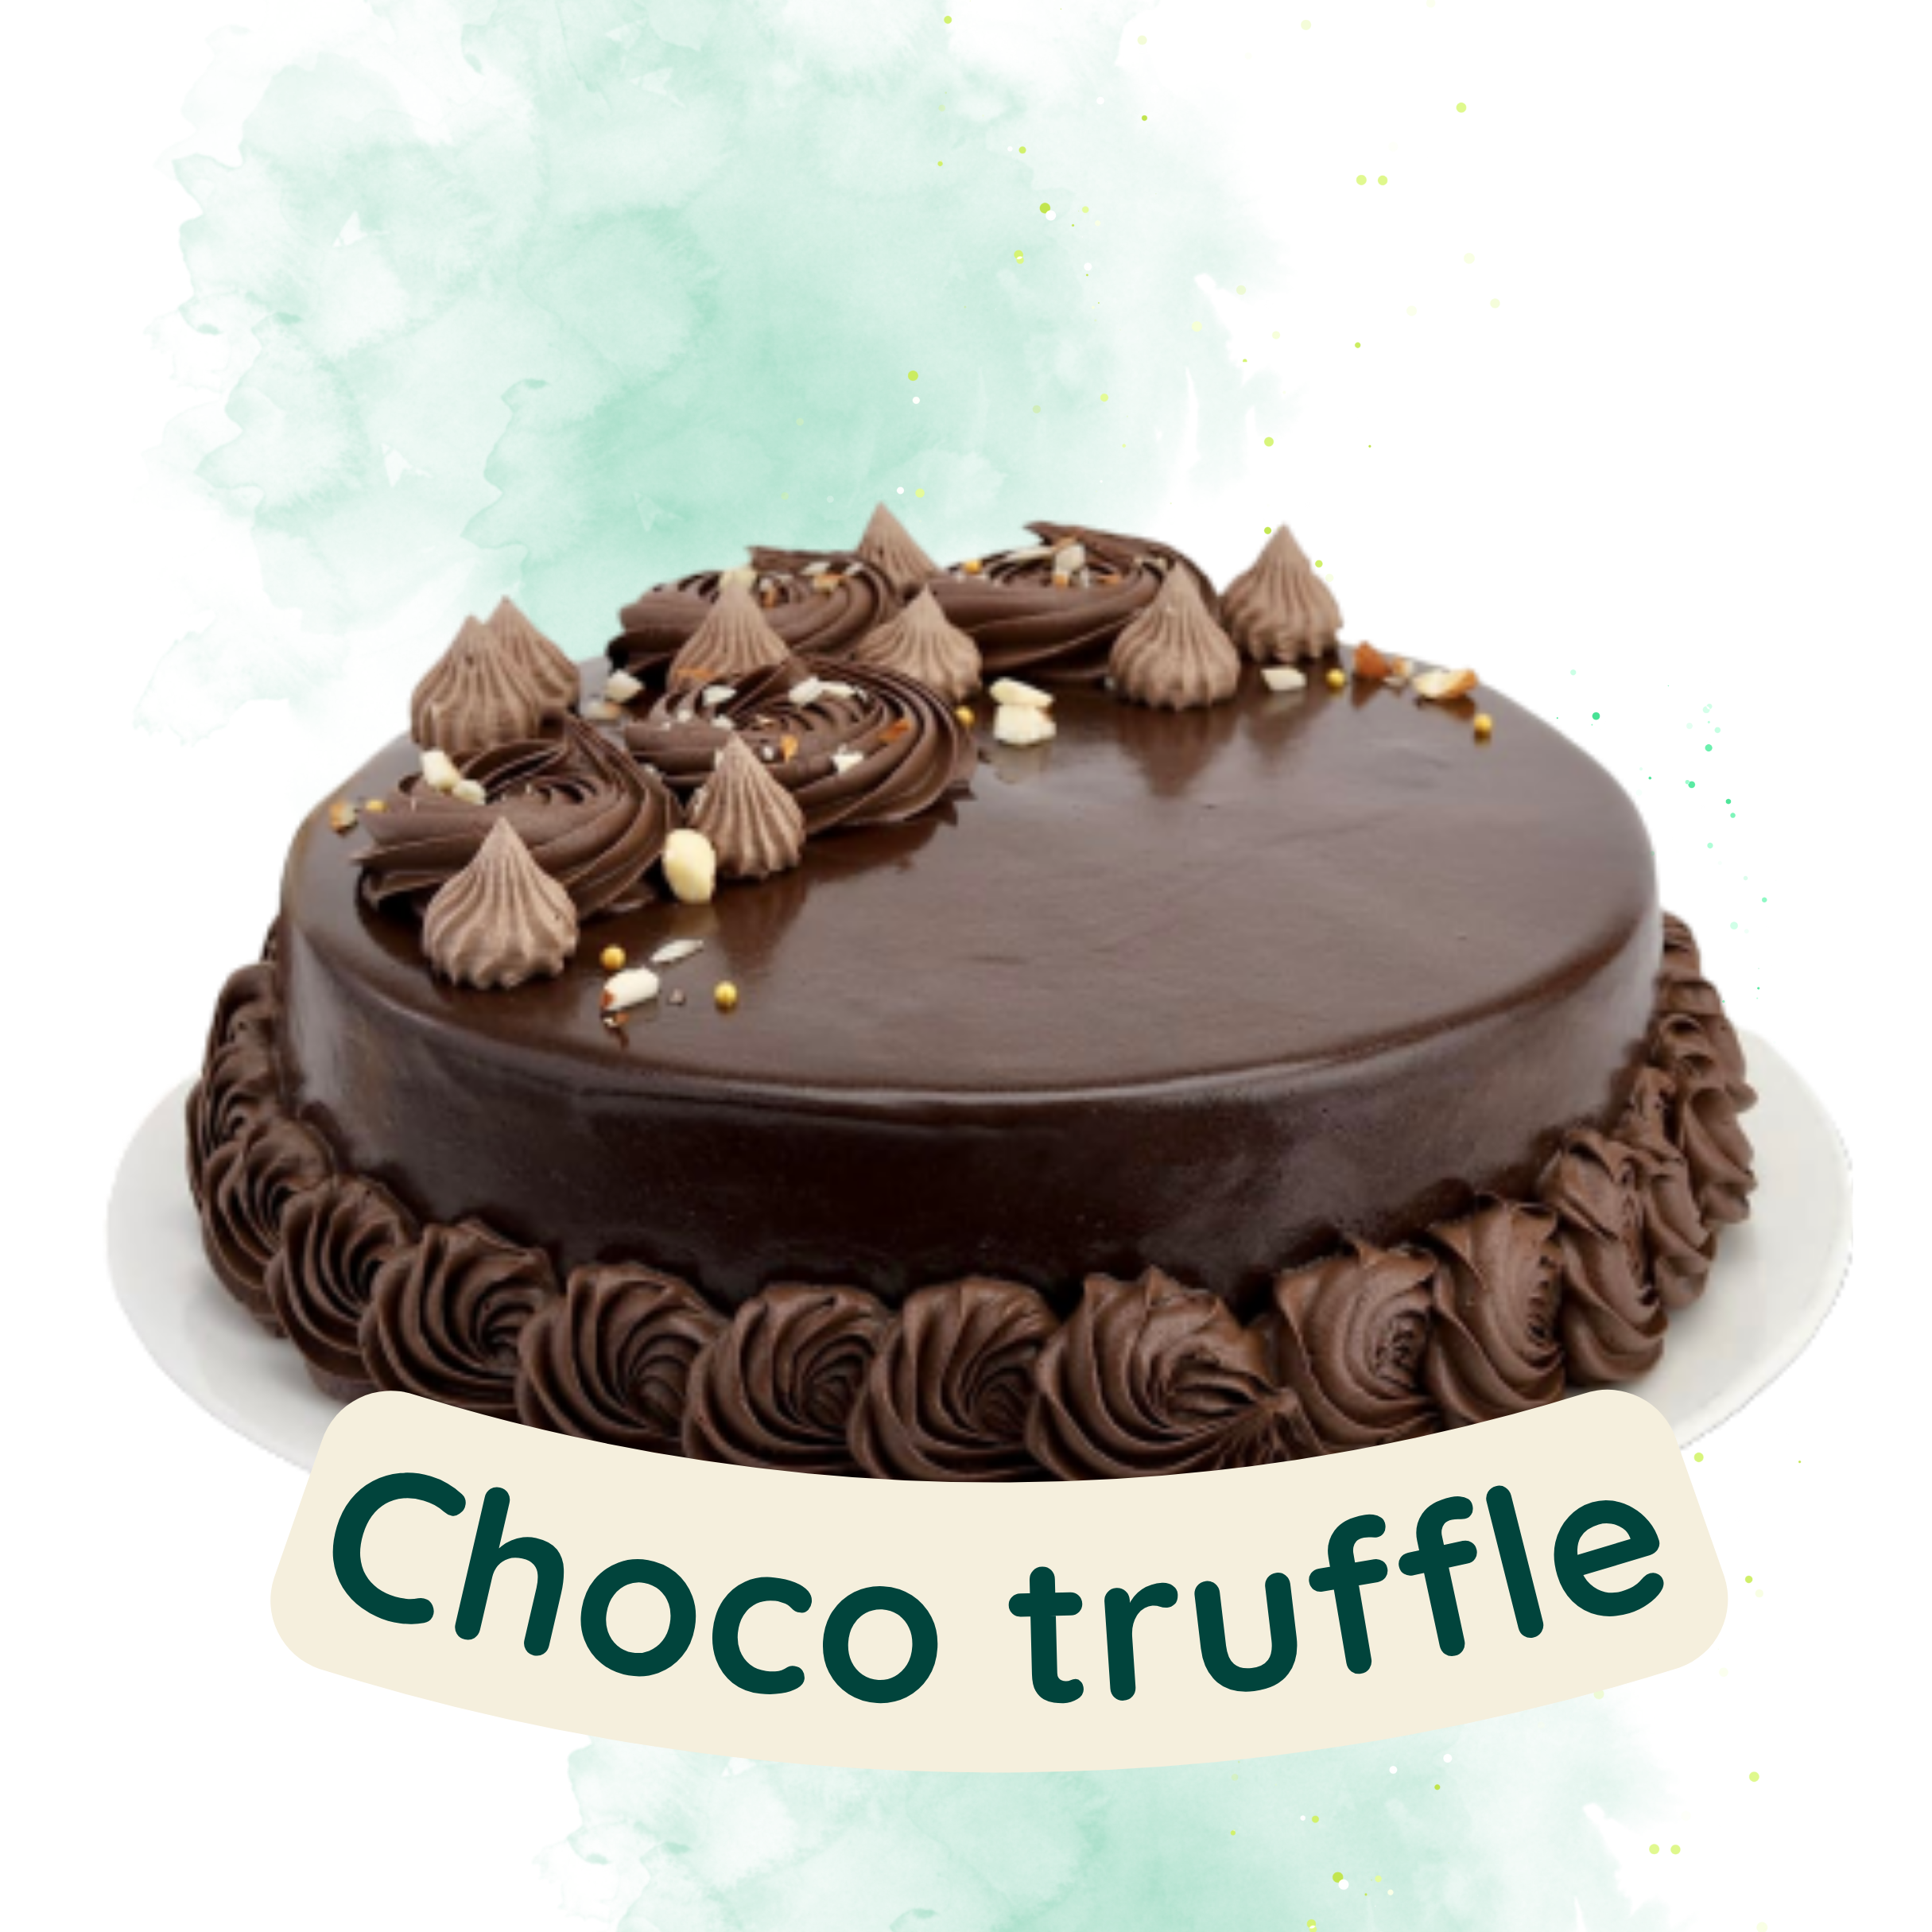 Order Chocolate Truffle Cake - Eggless in Bangalore - Happy Belly Bakes